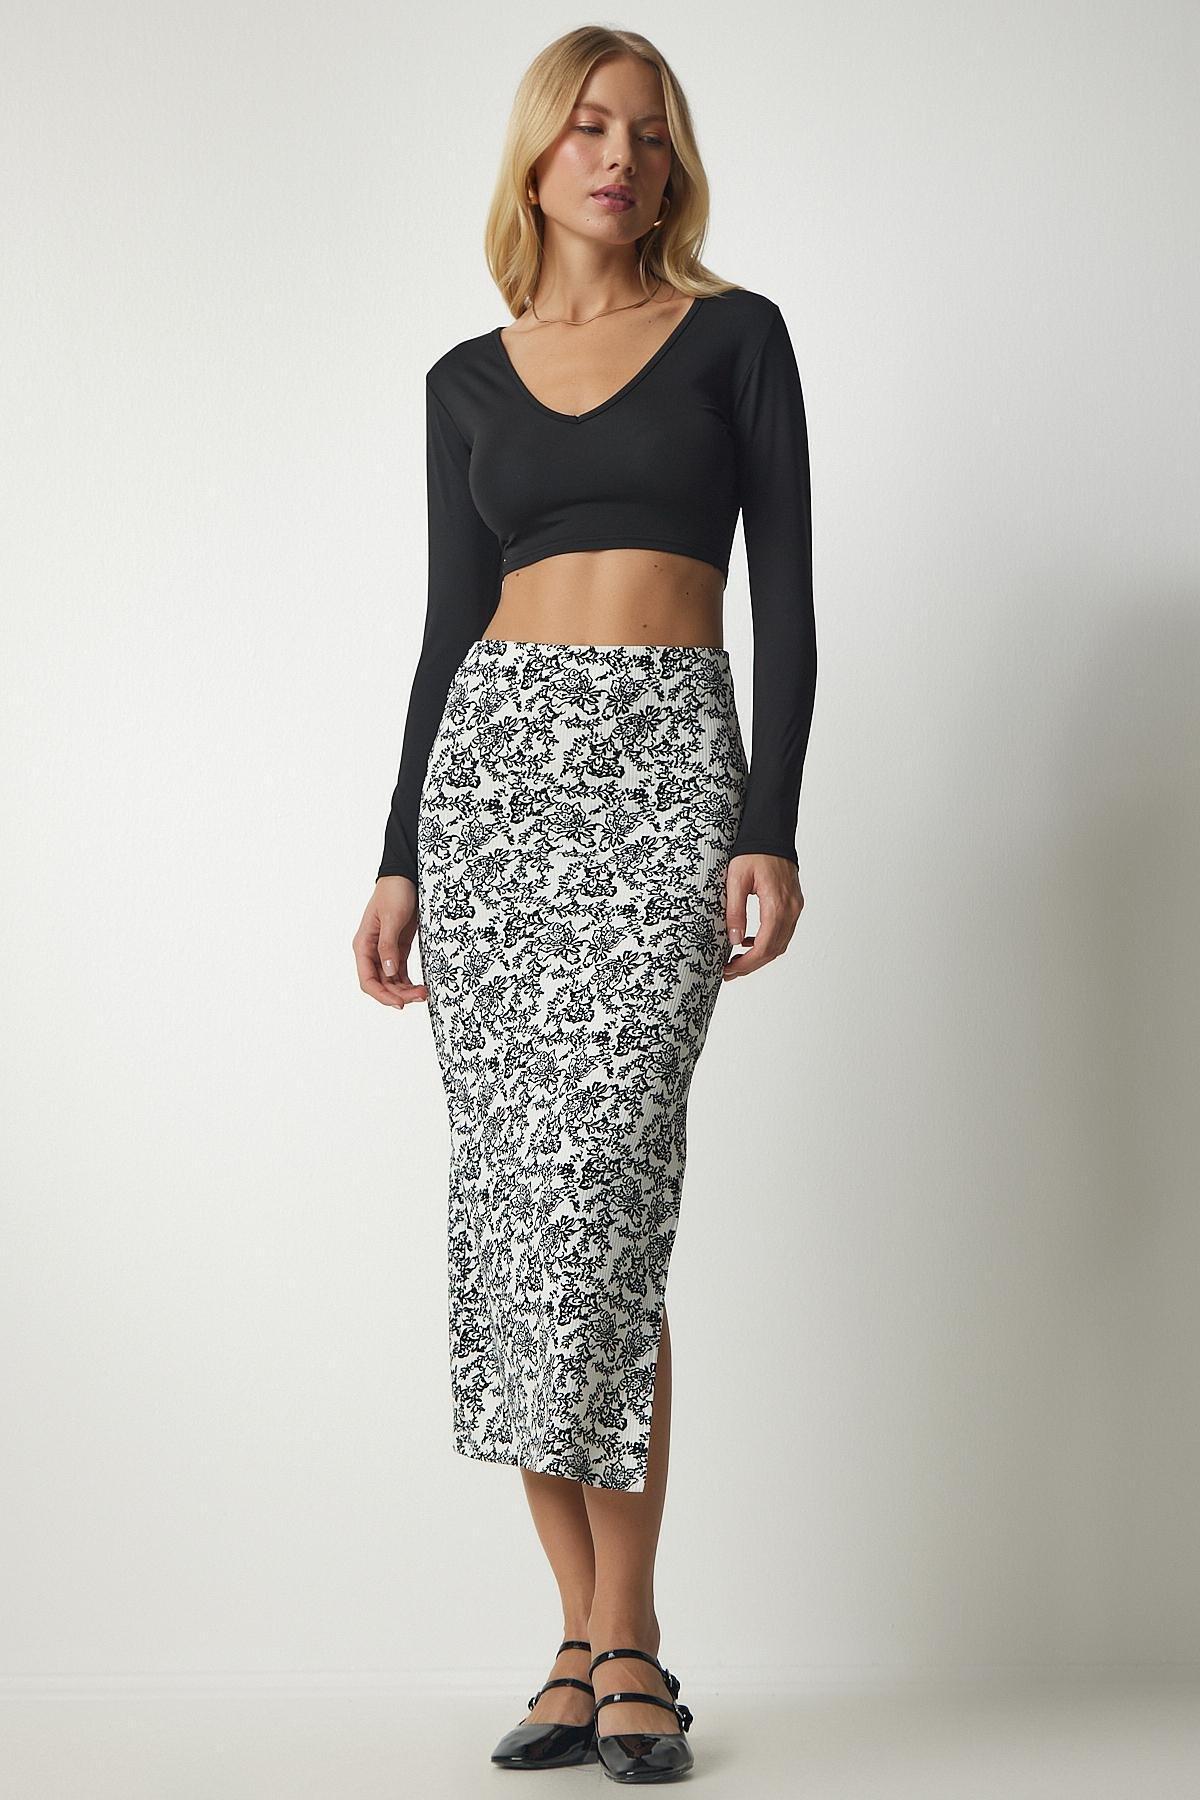 Happiness Istanbul - Multicolour Patterned Slit Camisole Skirt